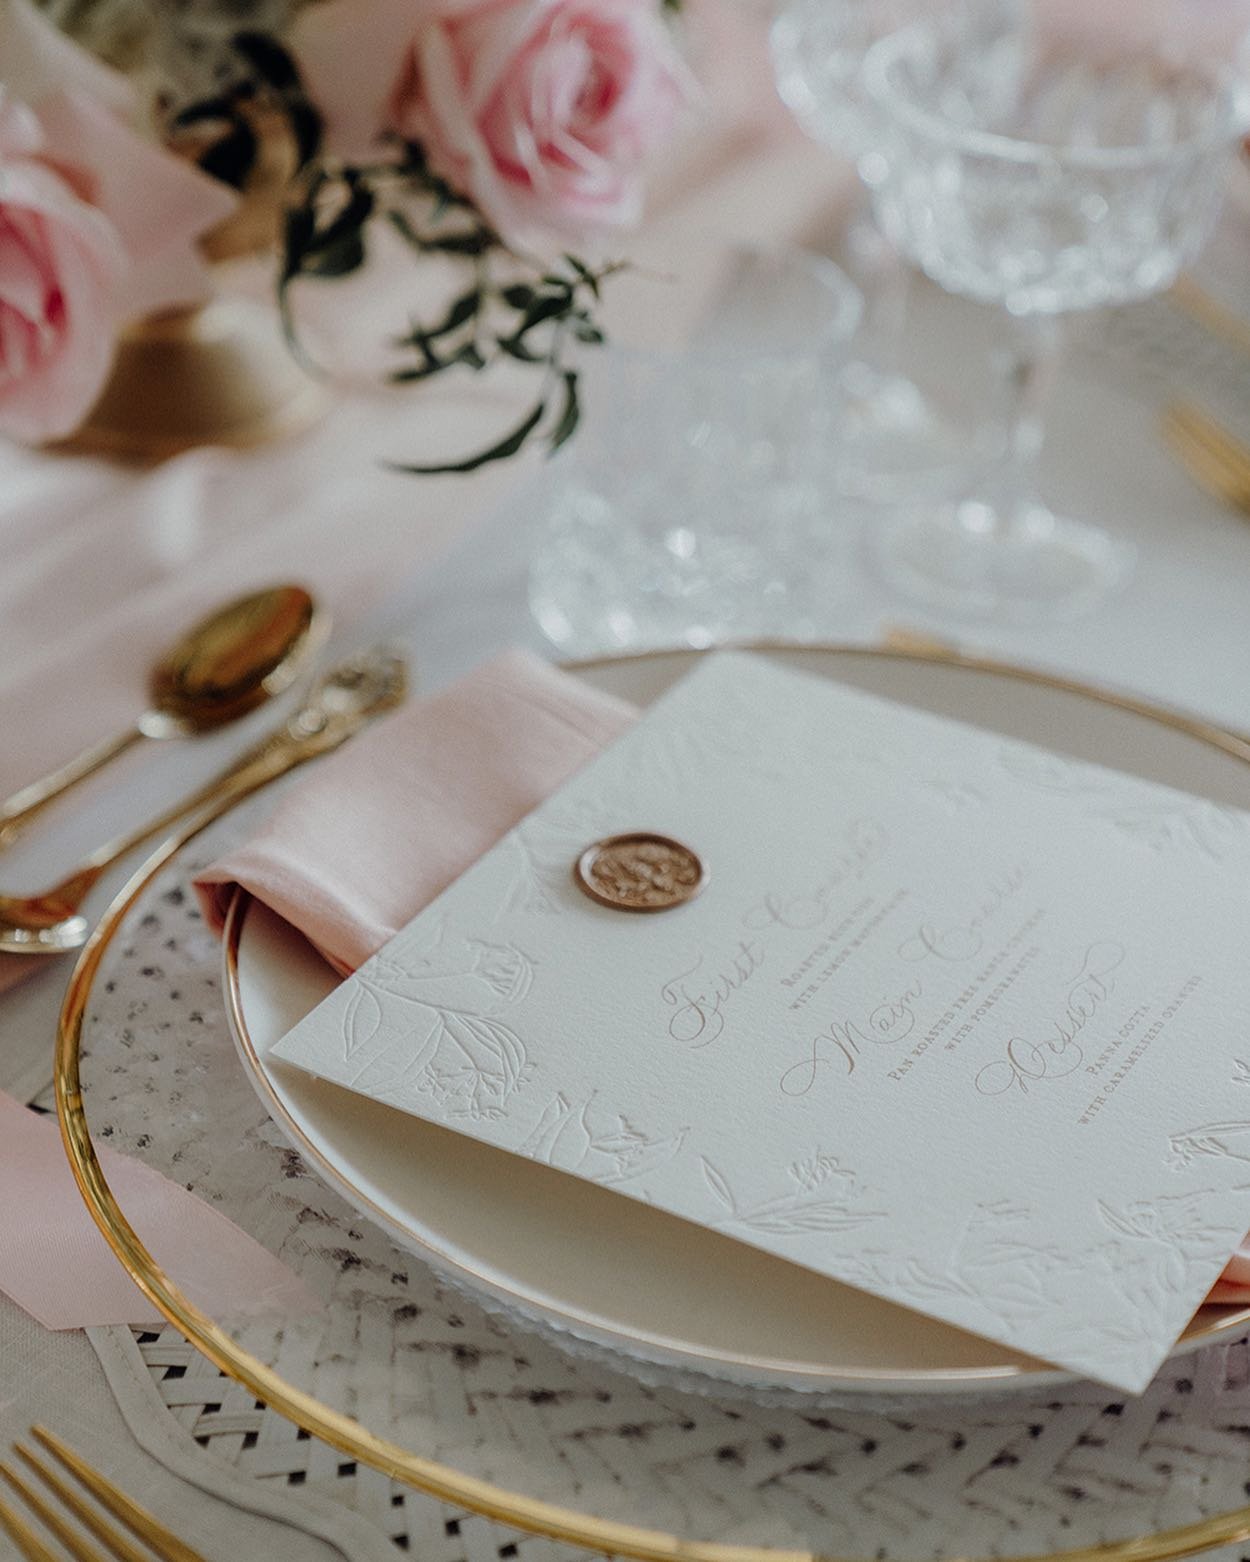 Beautiful custom menus with subtle letterpress details for a shoot with @vnillaevents at Pah Homestead 🌸
~
Photography: Amanda Thomas Photography @amanda_thomas_photography 
Florals: VNILLA Events (2x arches, aisle arrangements, plinths/urns and urn